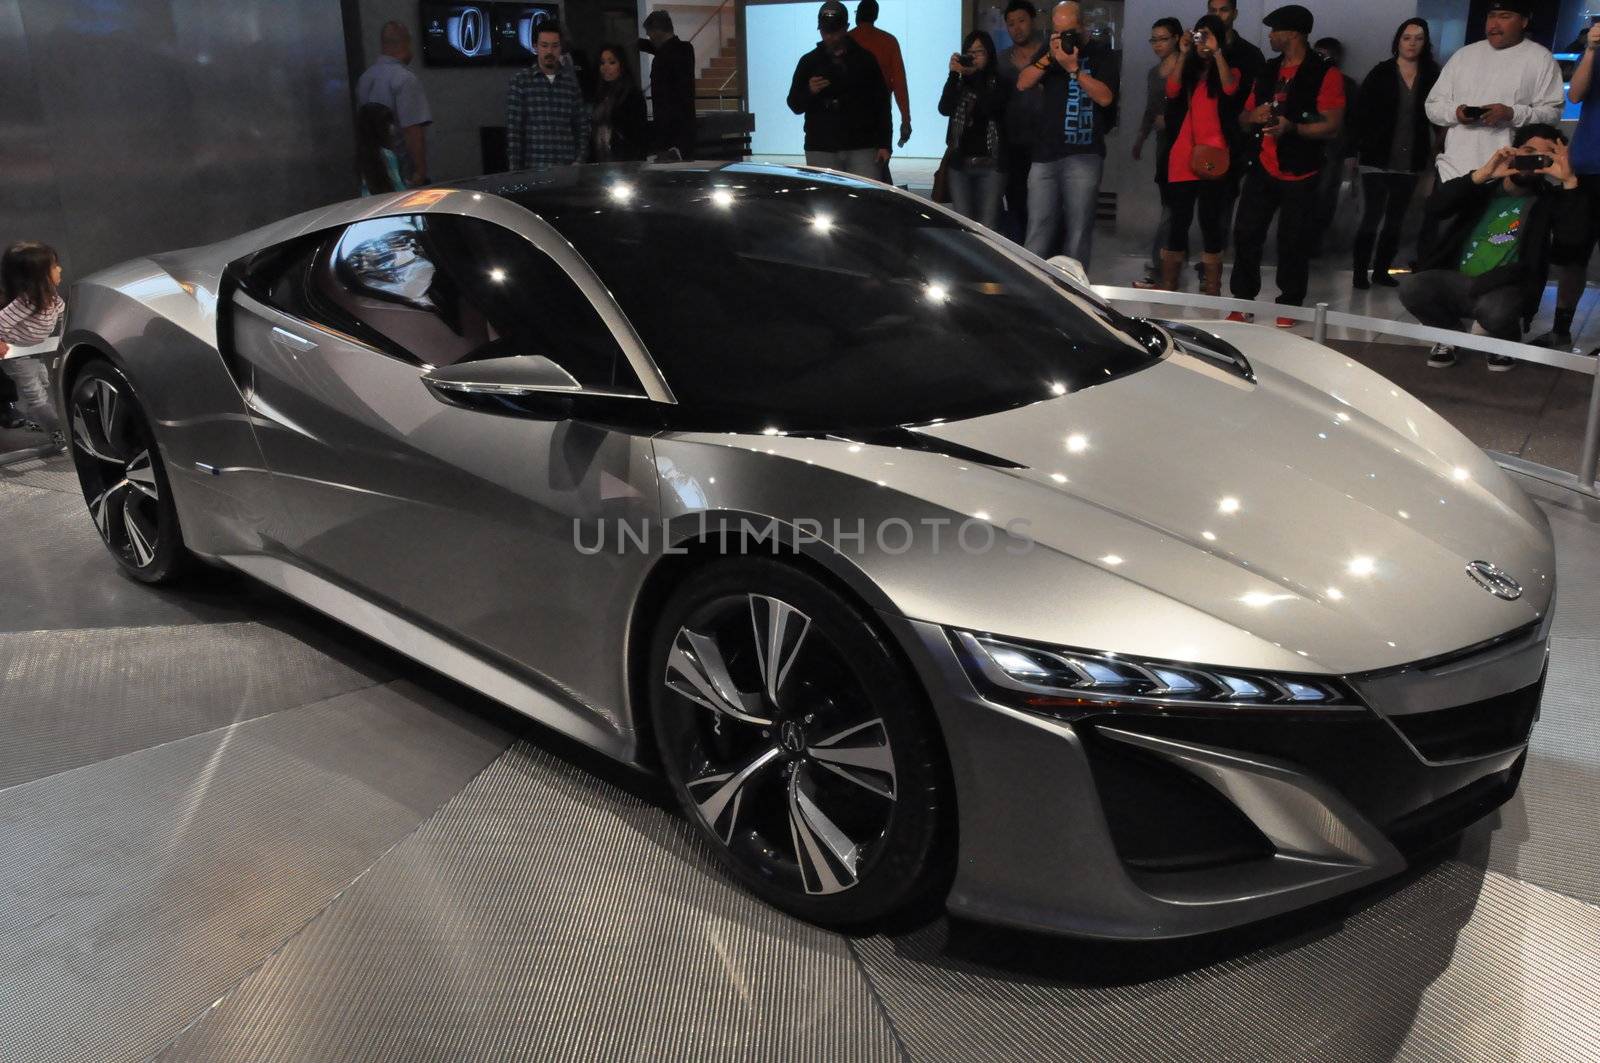 Acura NSX Concept Car at the 2012 Los Angeles Auto Show